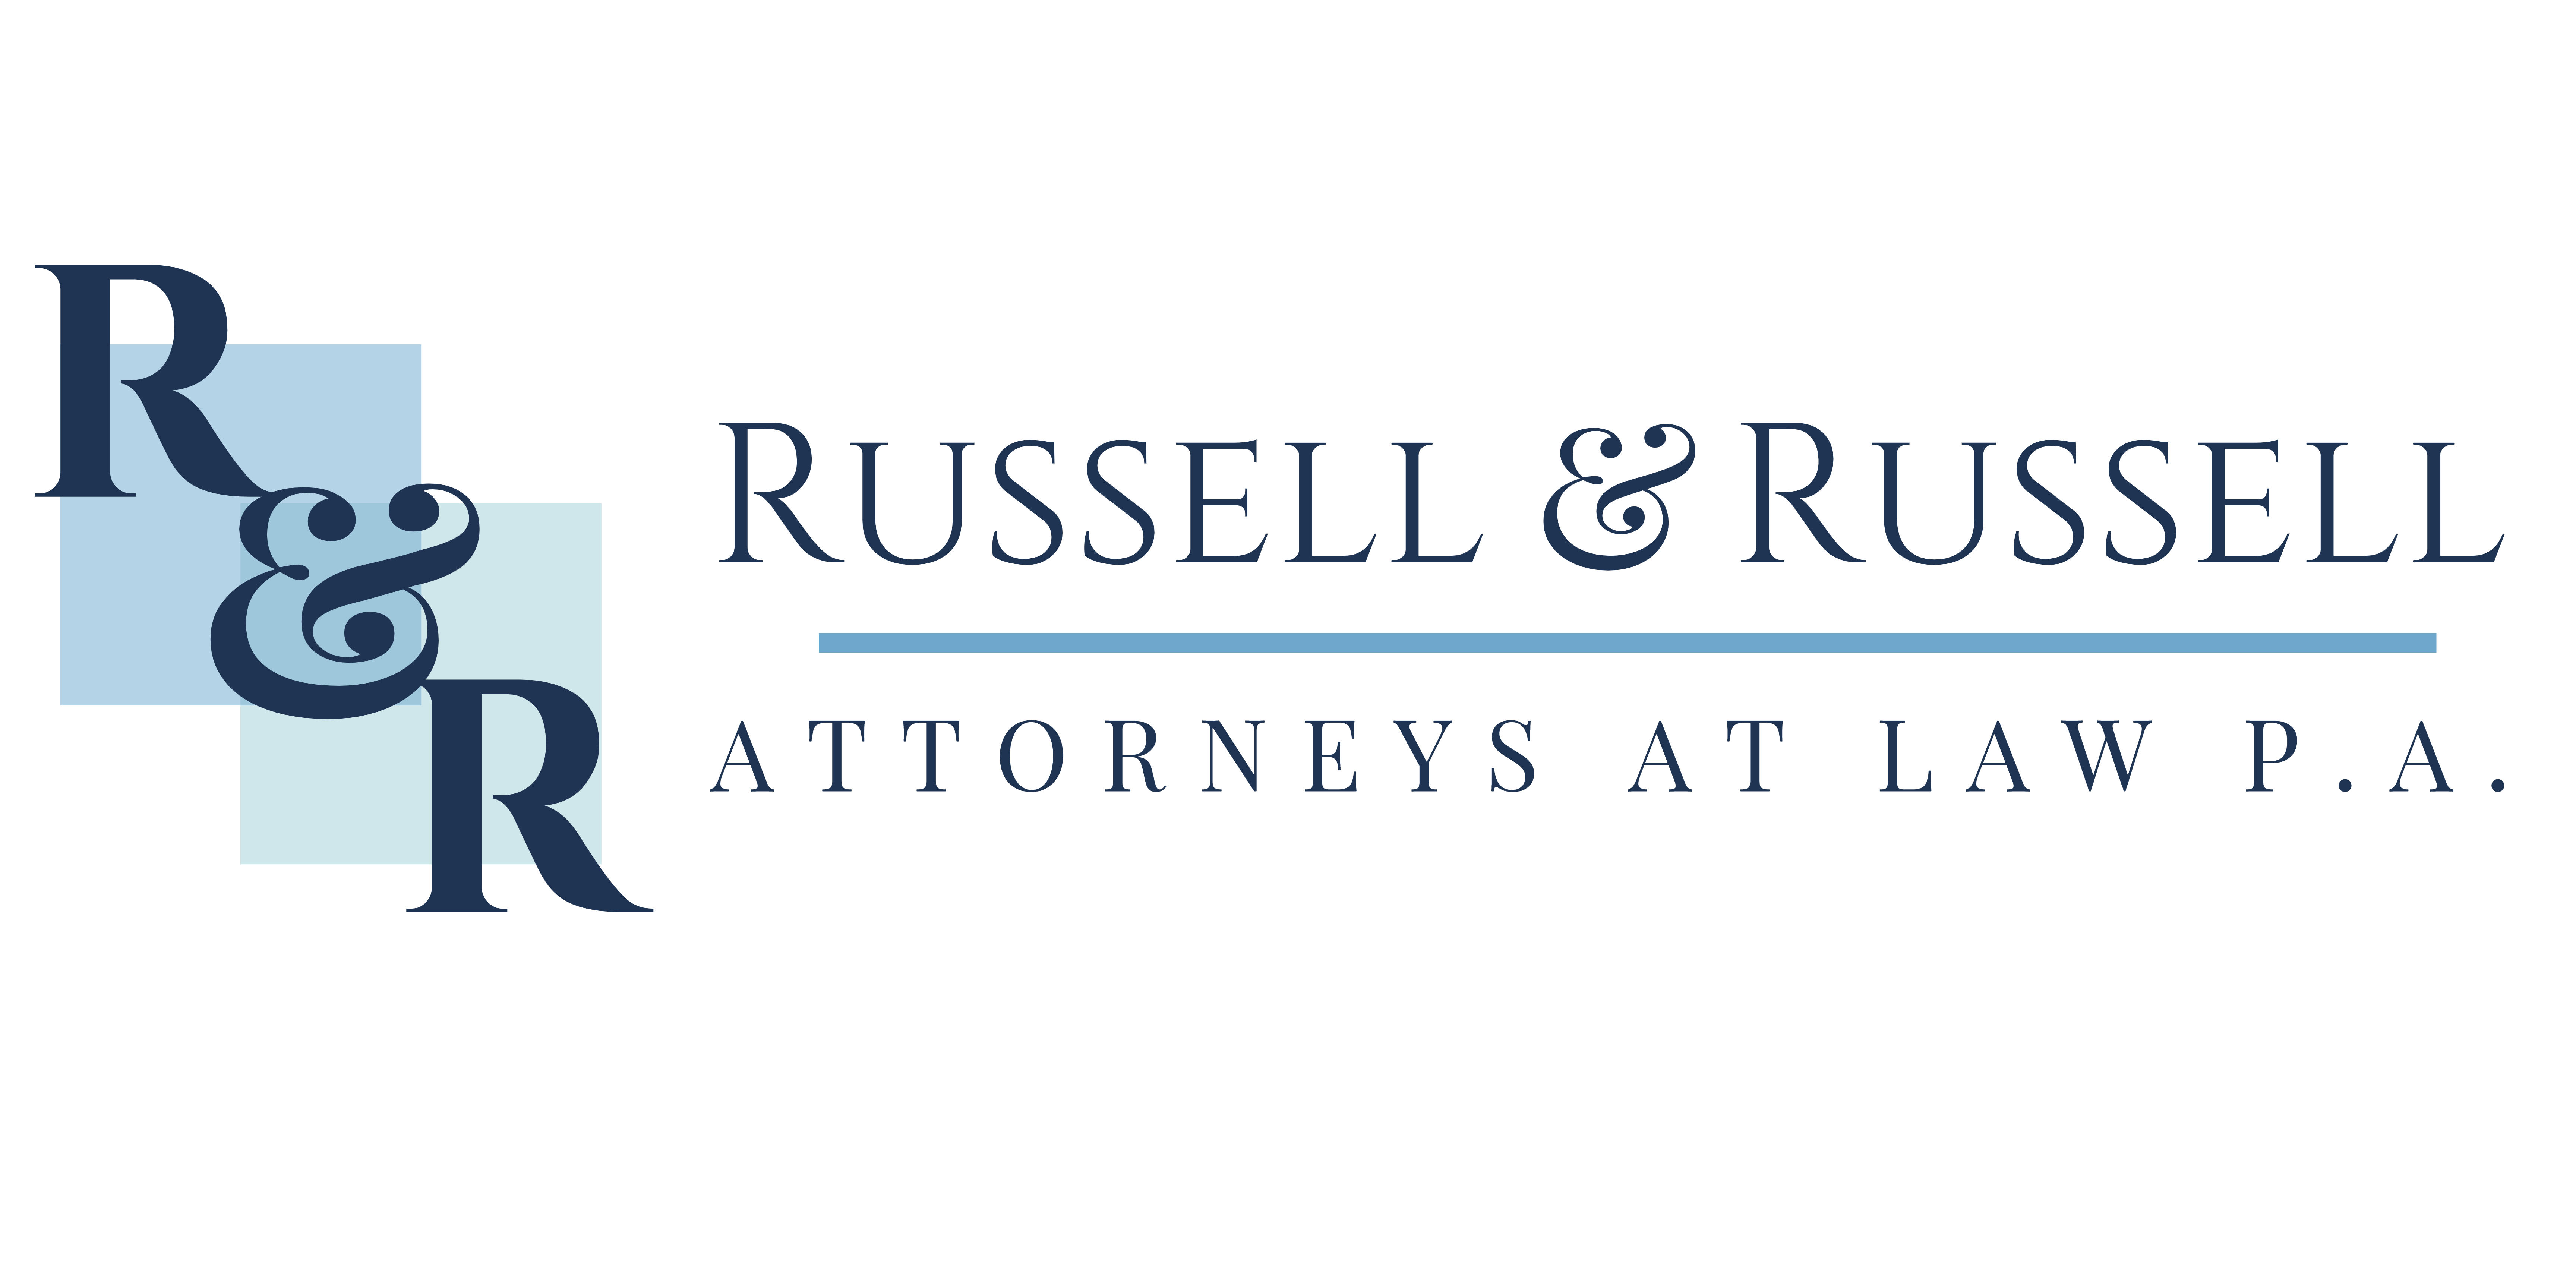 Russell & Russell Attorneys at Law P.A.